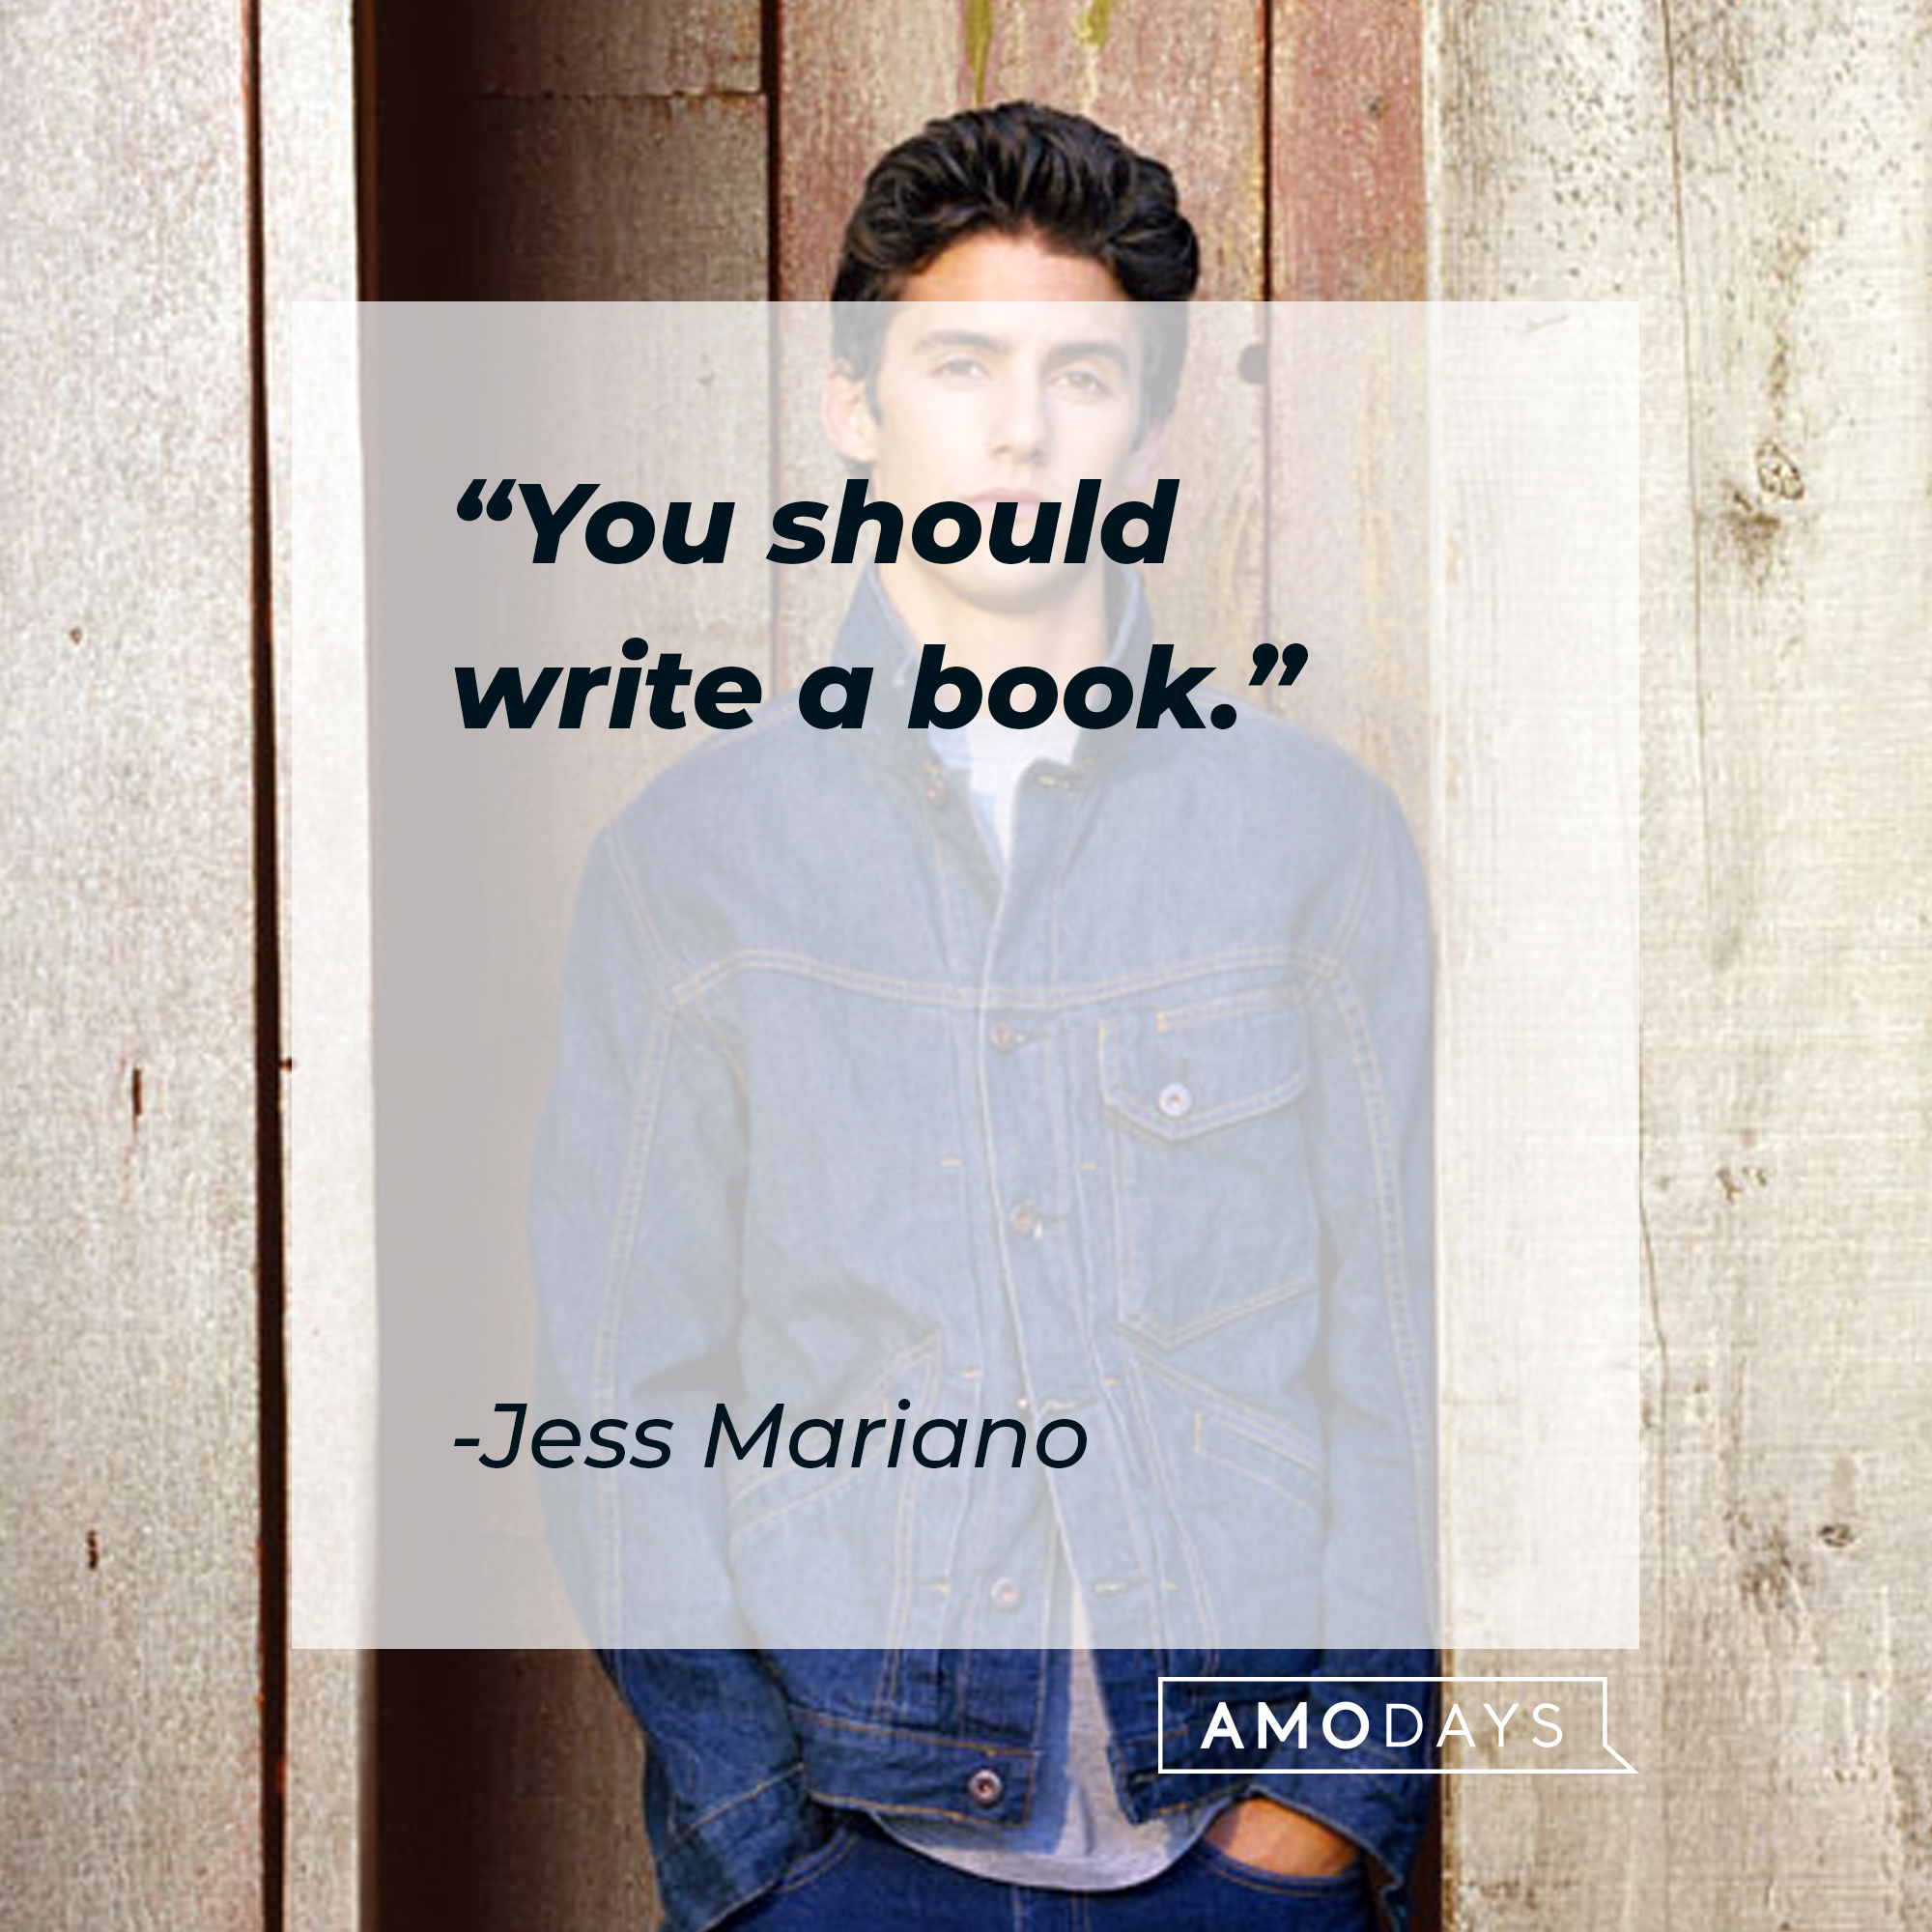 Jess Mariano, with his quote:  "You should write a book." | Source: facebook.com/GilmoreGirls